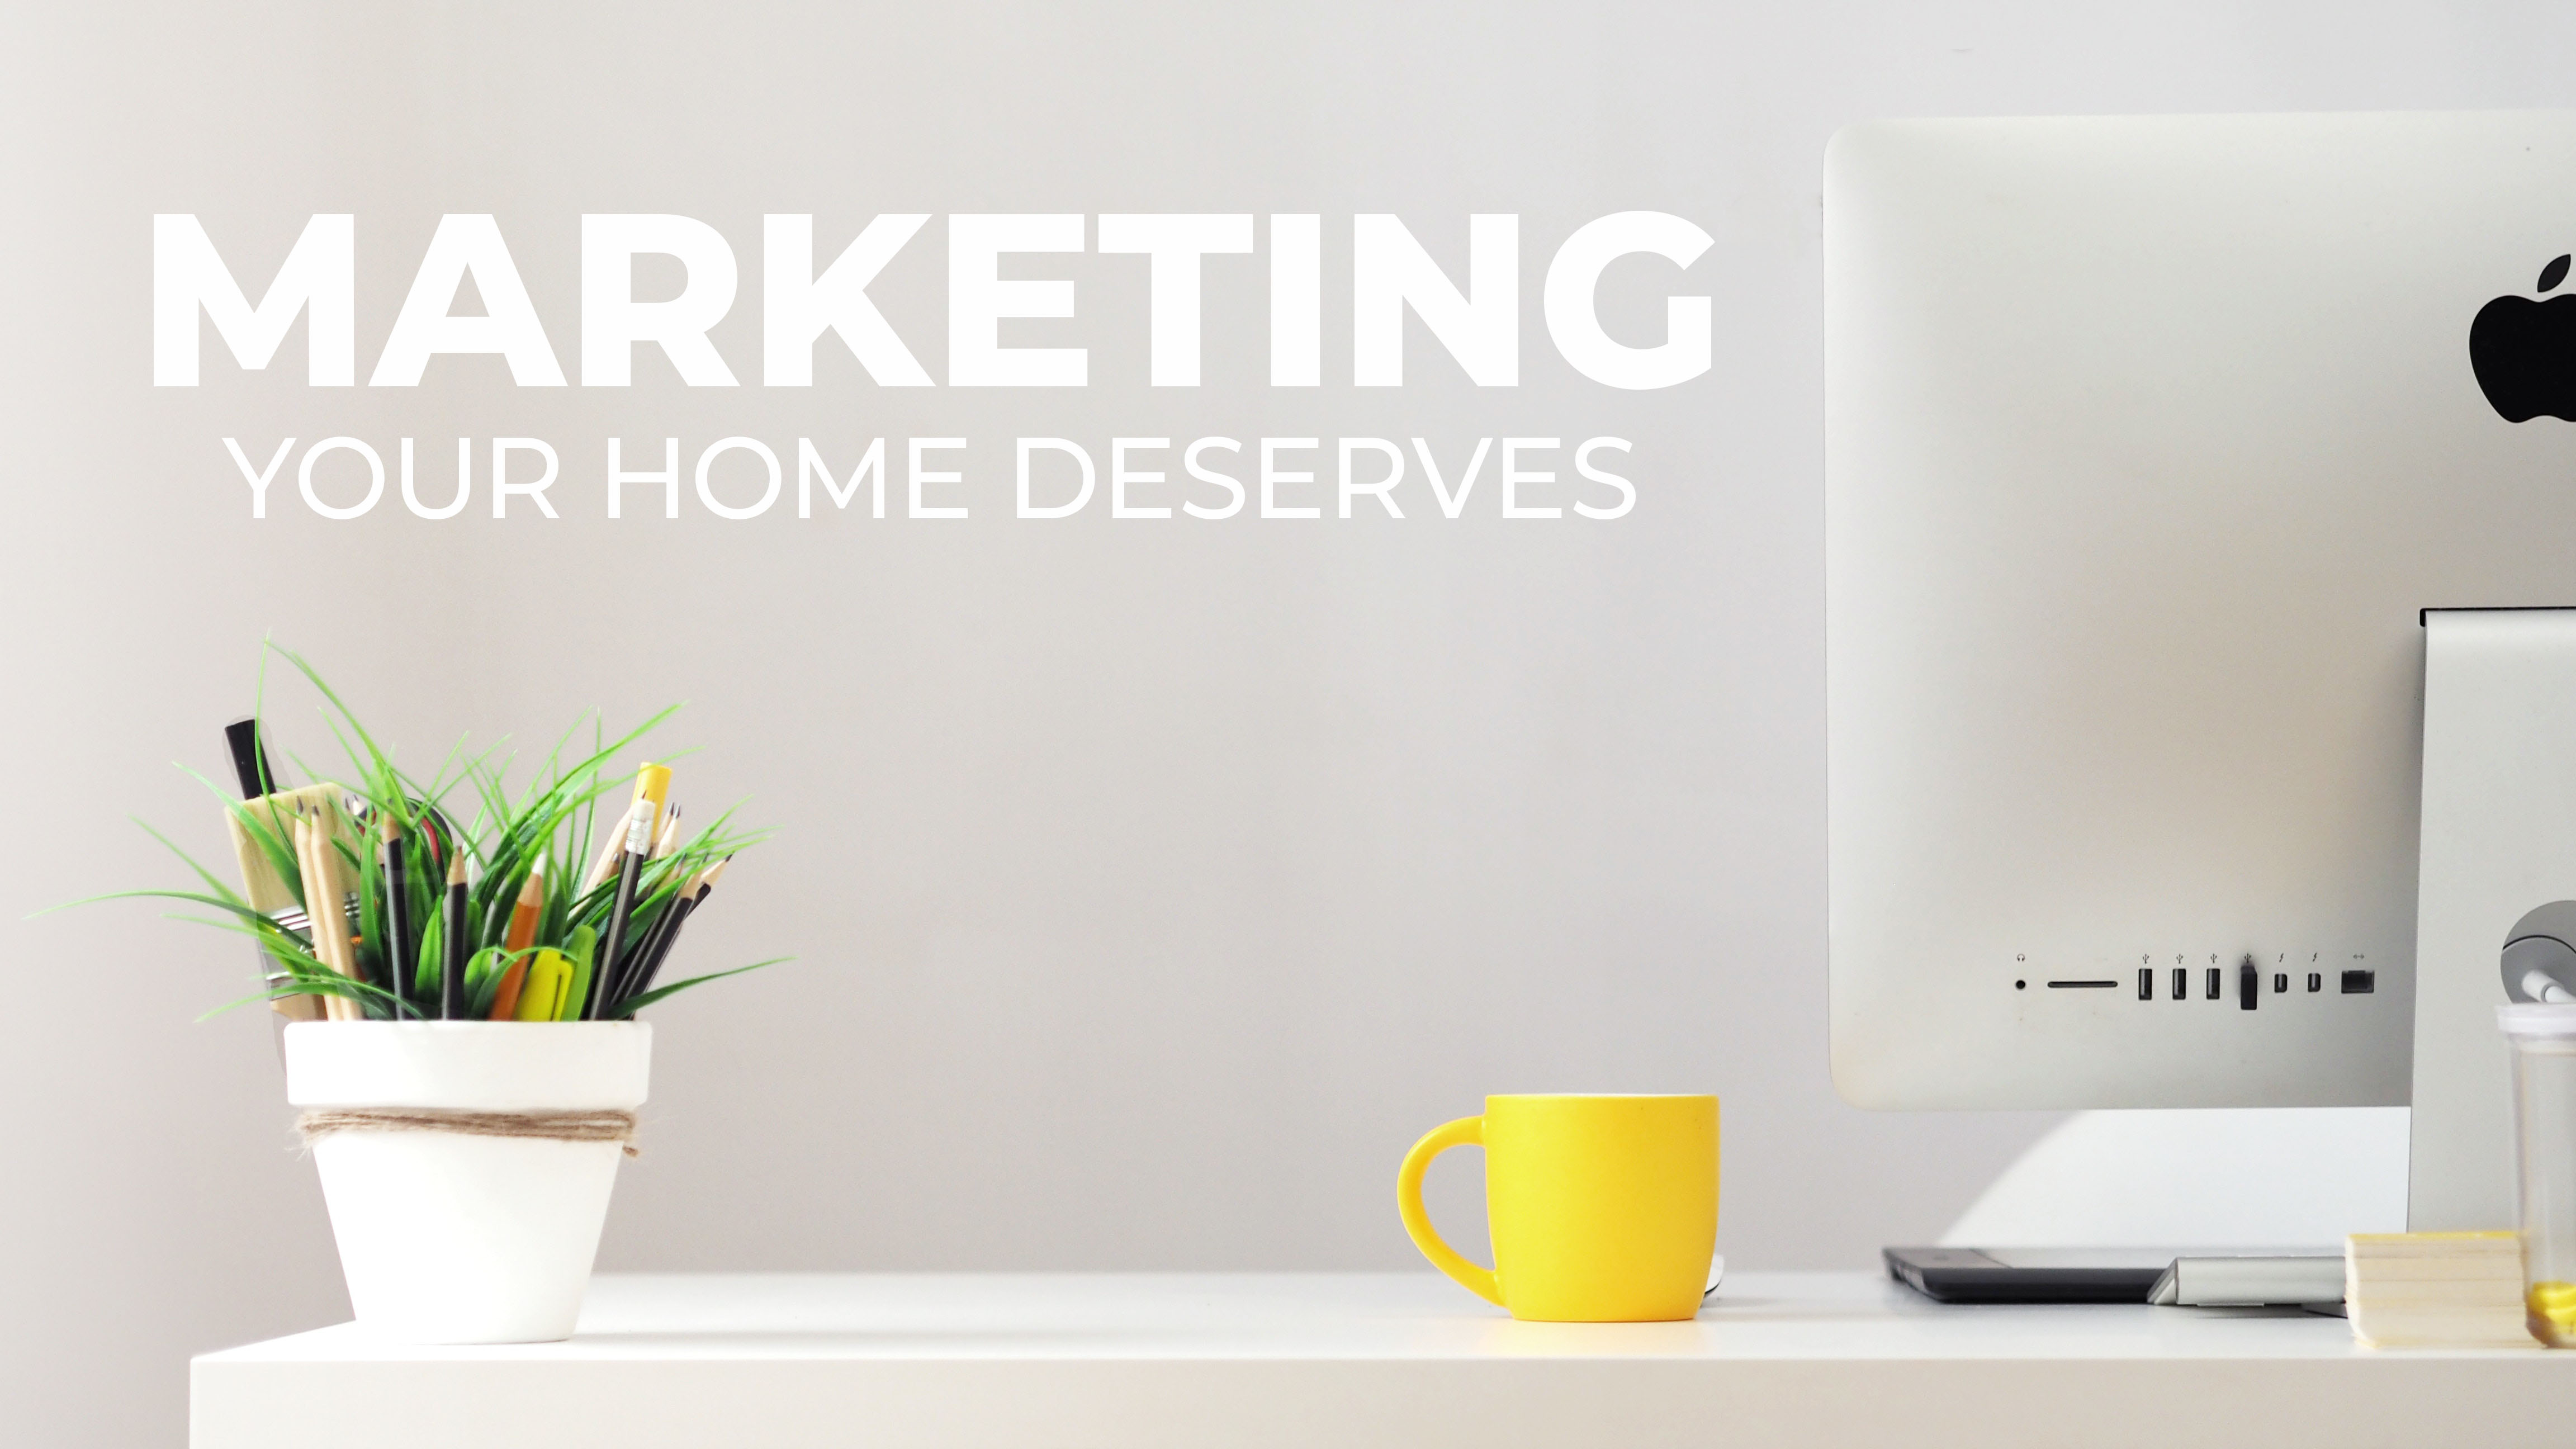 The Marketing Your Home Deserves